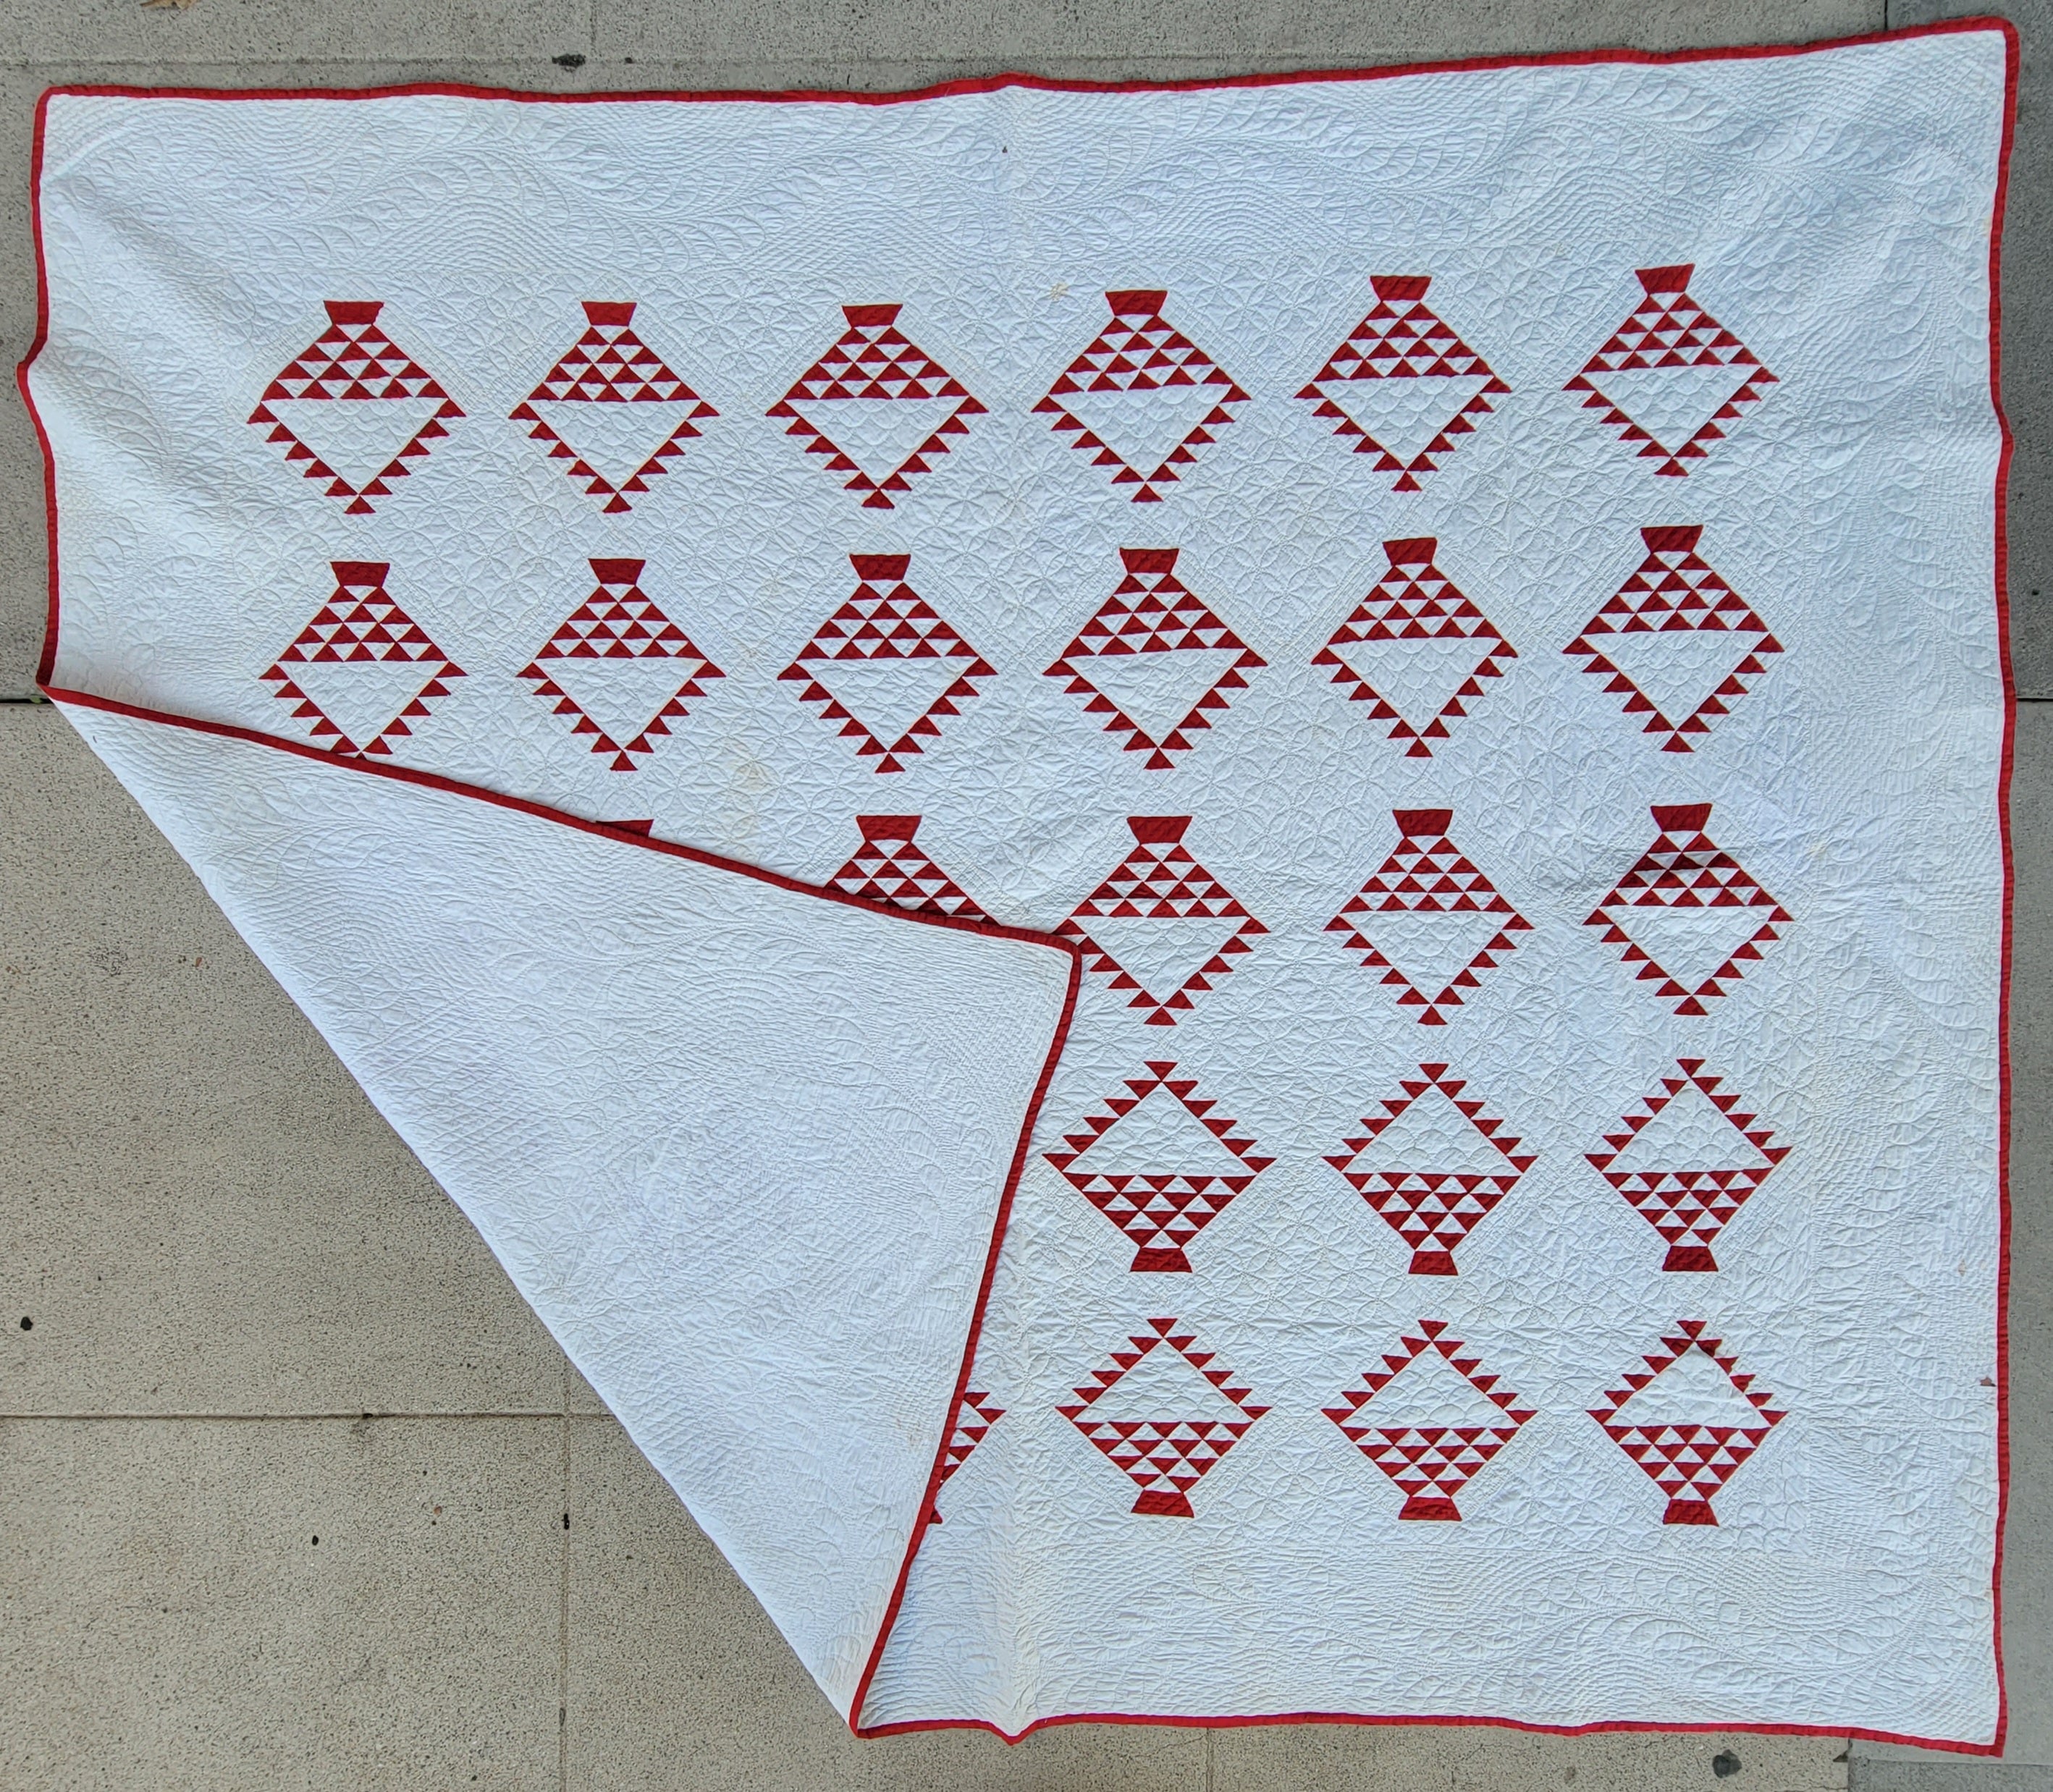 This amazing baskets of chips quilt is in a cherry red & white in very good condition. This quilt was found in Ohio and it is in fine condition.